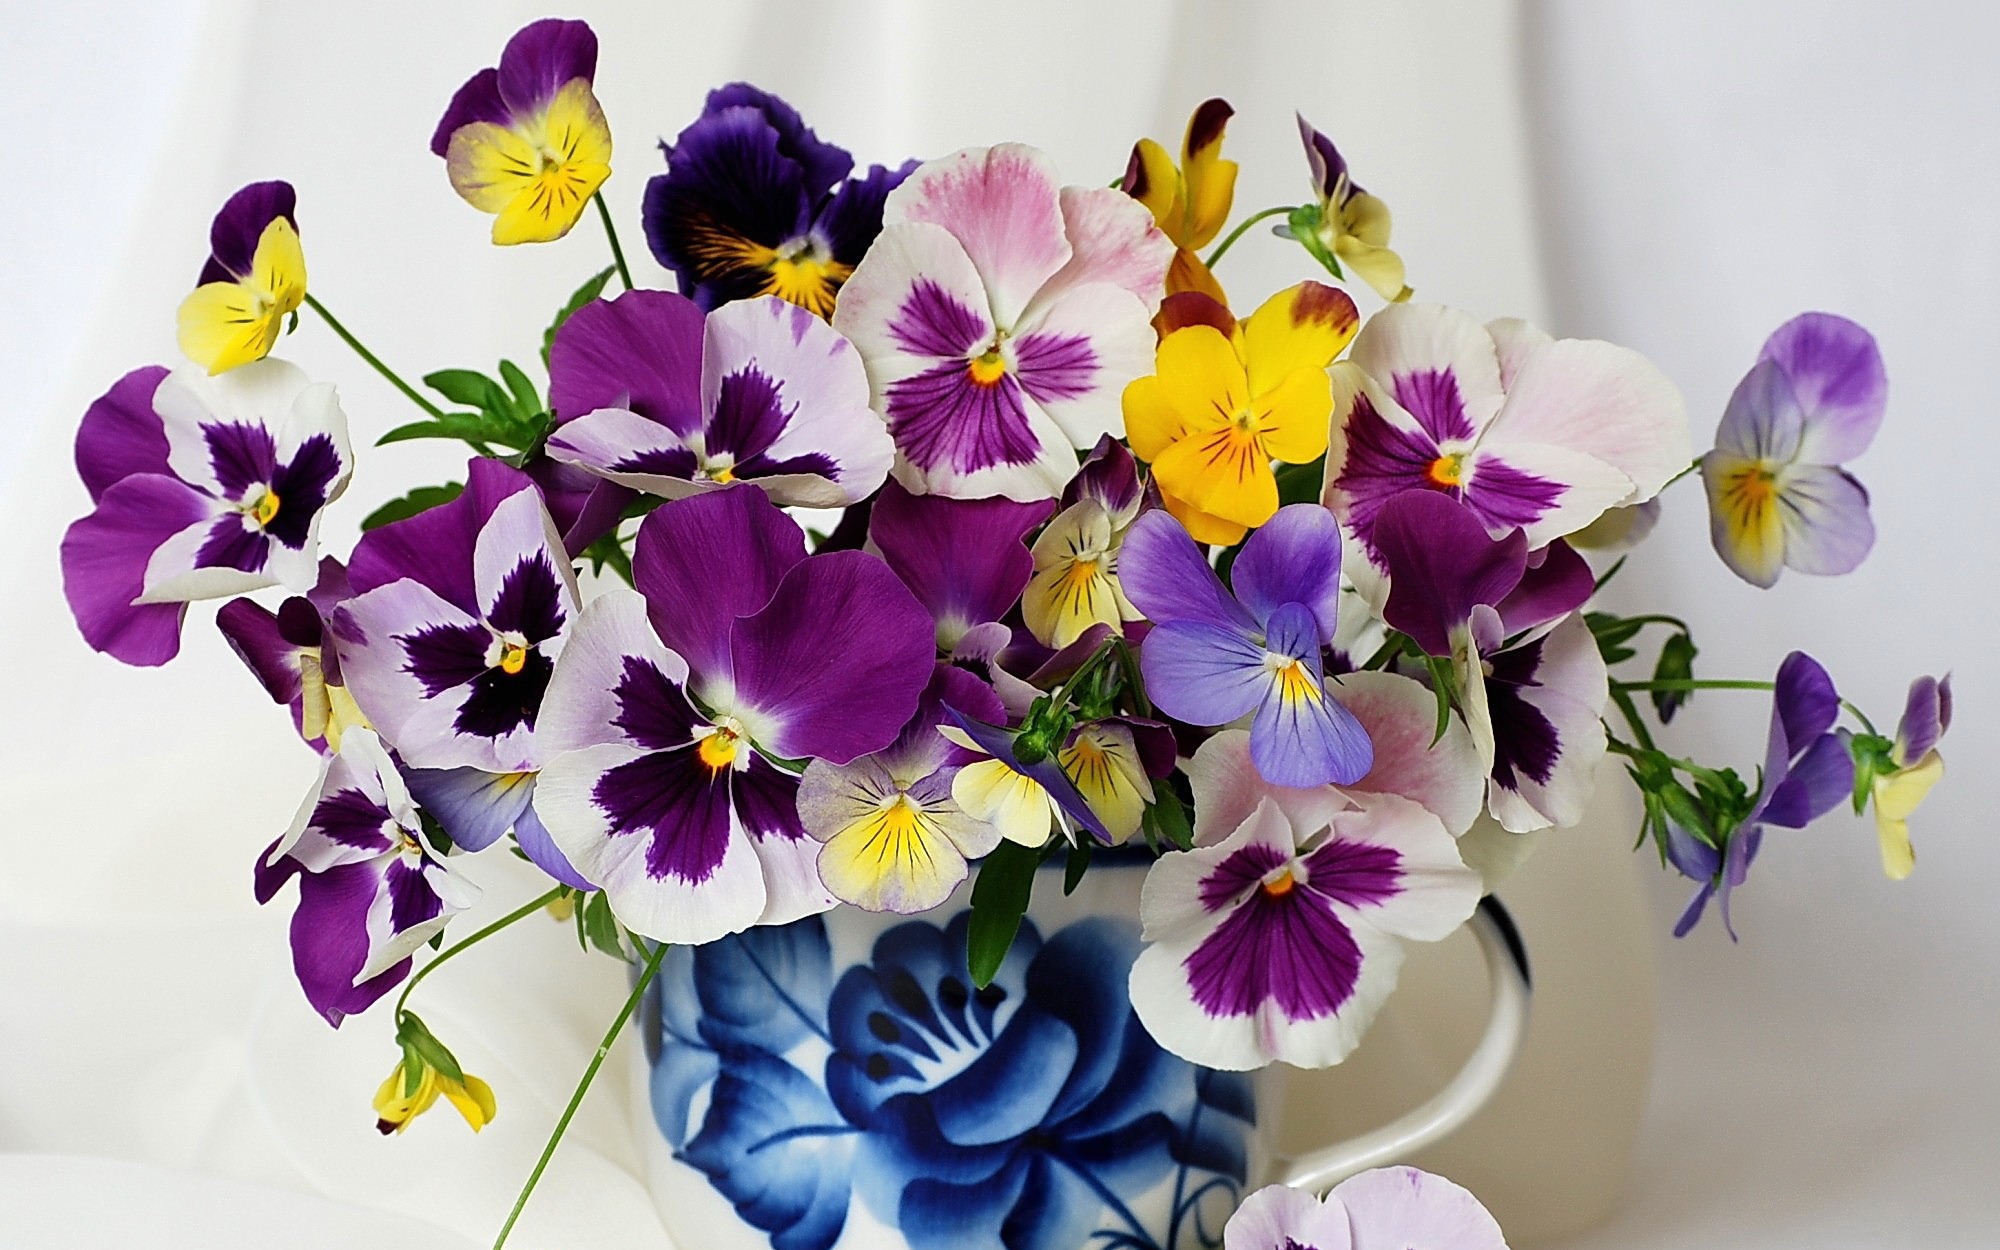 Violet Pansy Wallpaper And Image Pictures Photos